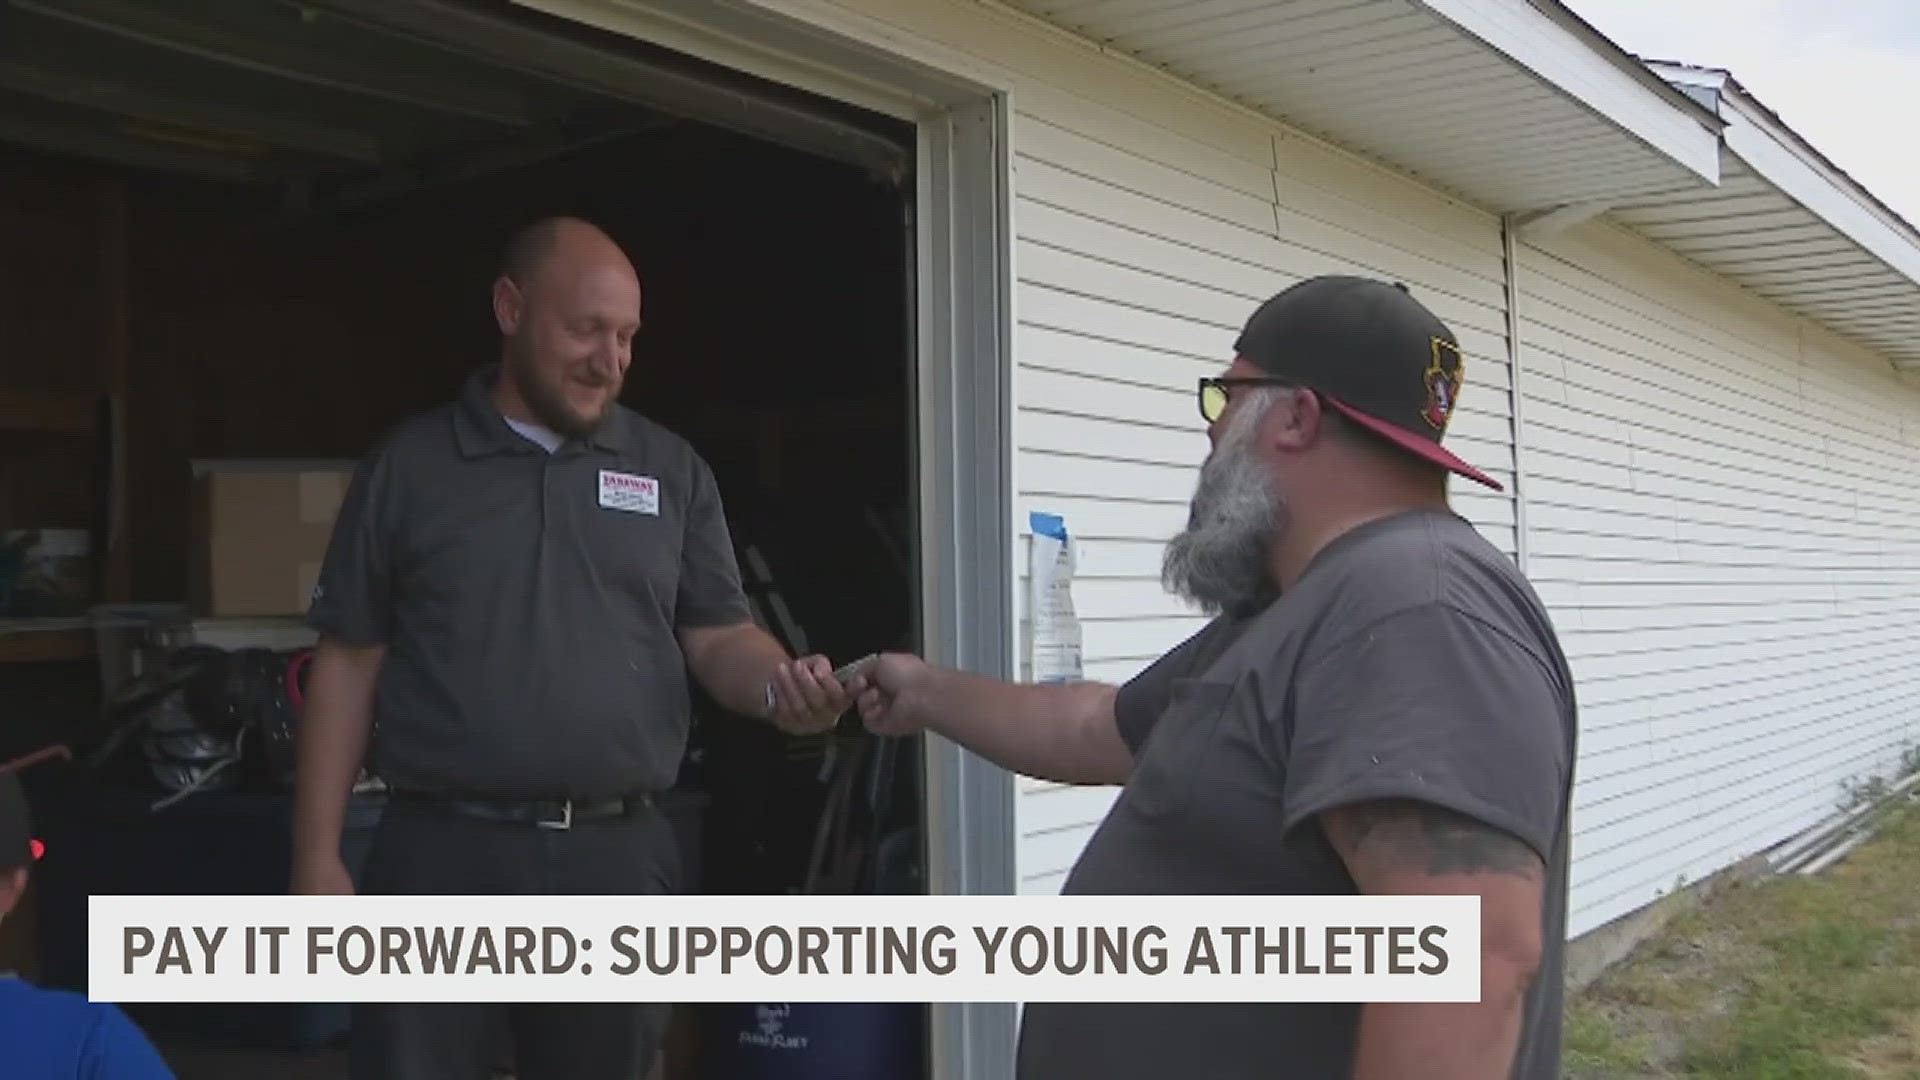 From being a participant in Moline's youth sports to helping improve them for years to come, Brad Hines is truly paying it forward.